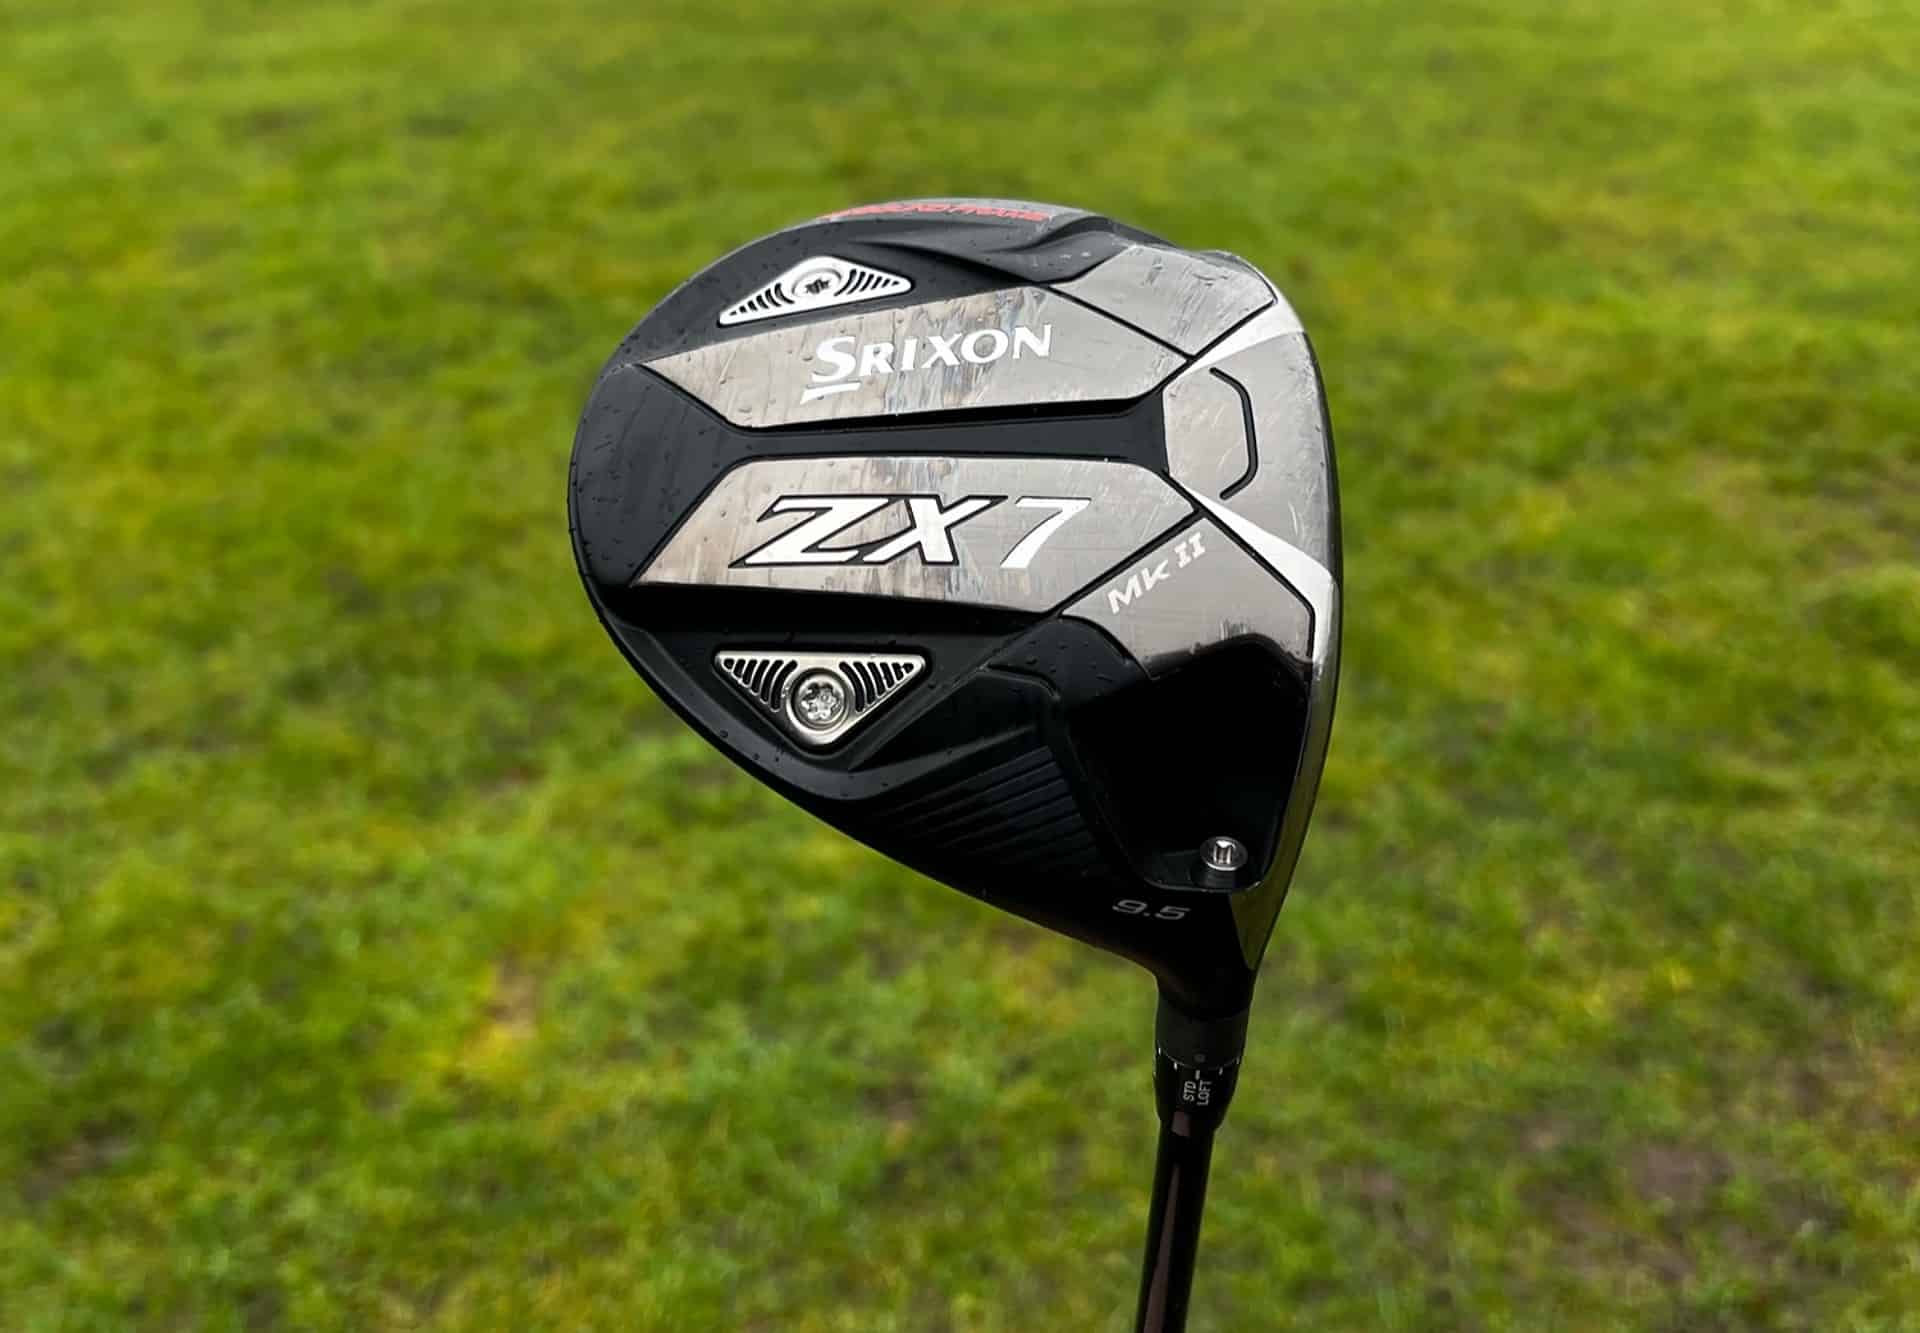 Srixon ZX7 mkii driver review